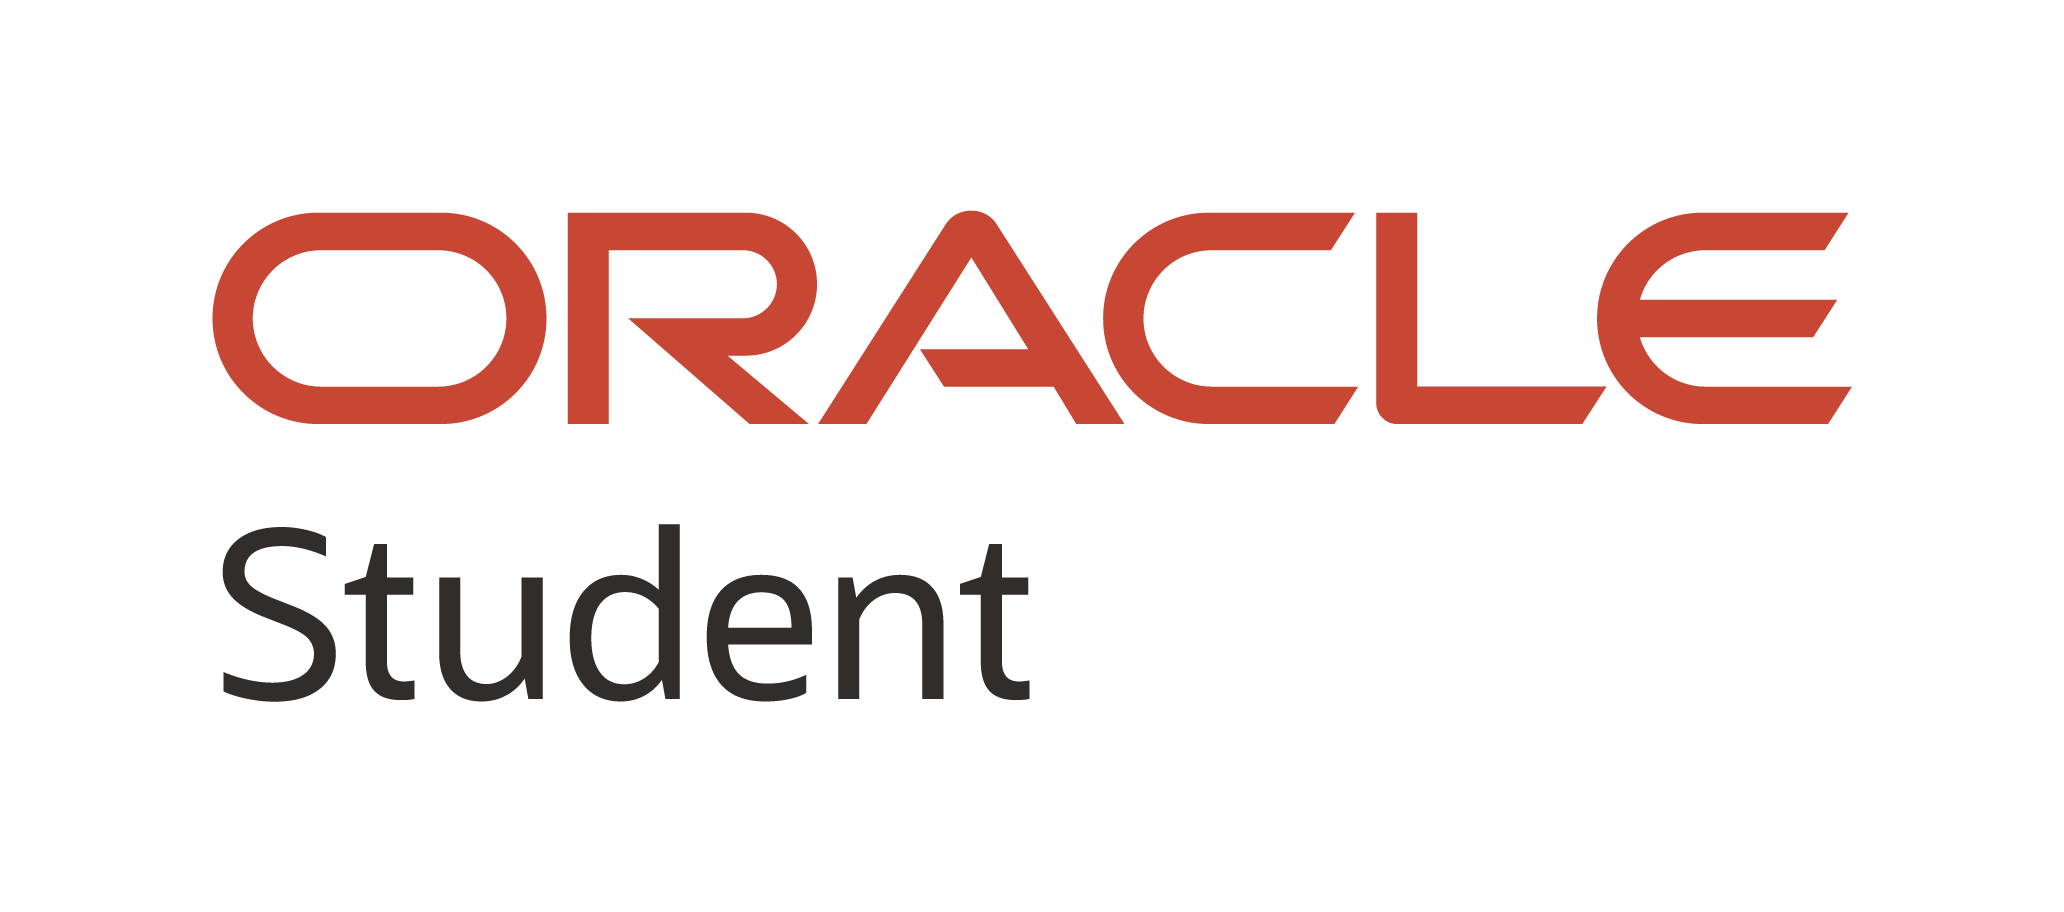 Download Oracle Logo PNG Image for Free